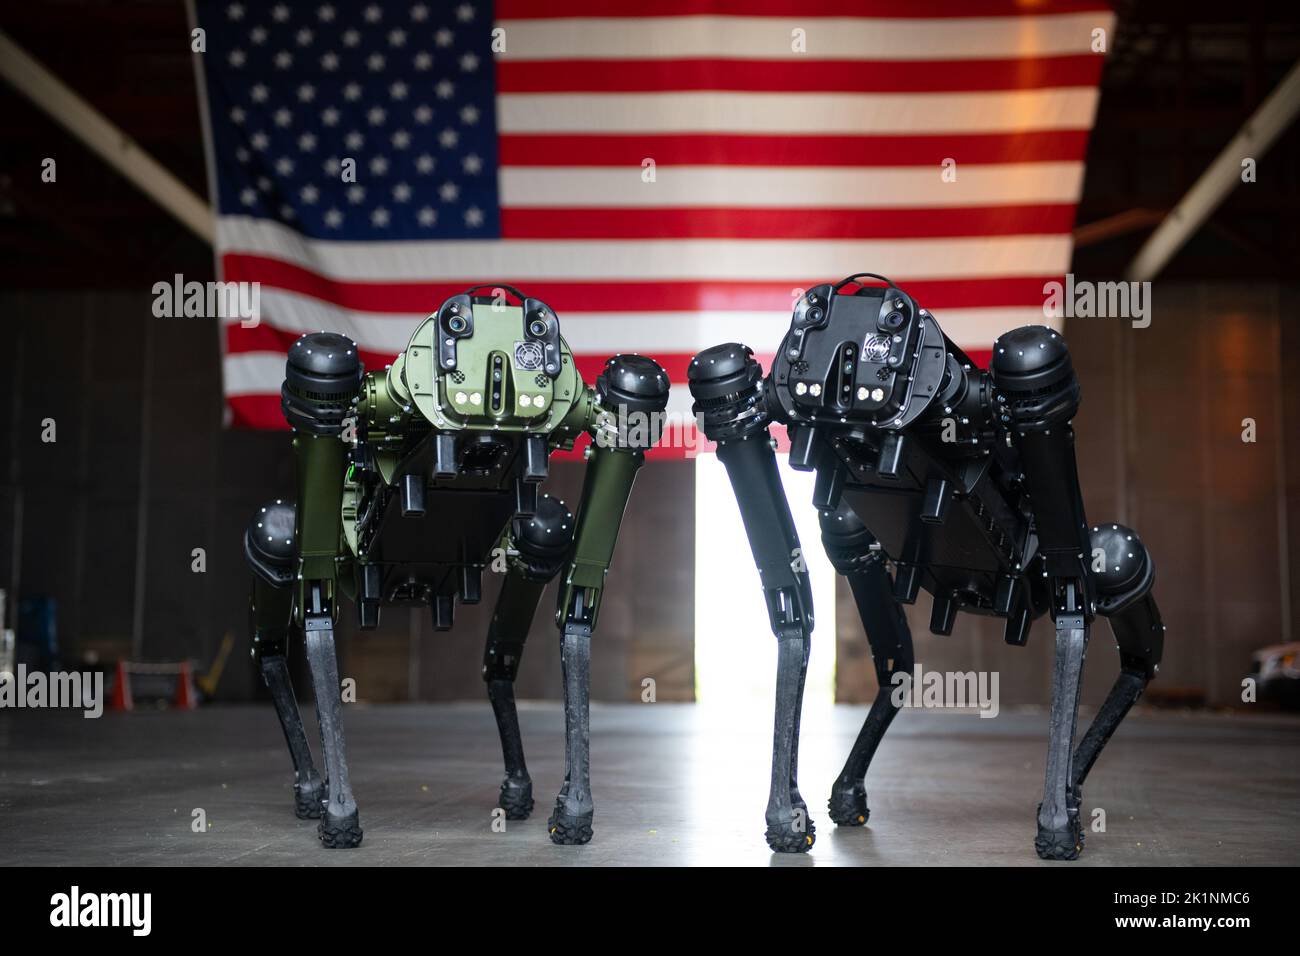 Cape Canaveral, United States of America. 27 July, 2022. Two Ghost Robotics Quadruped Vision 60 Unmanned Ground Vehicles known as robotic dogs, pose in front of an American flag at Cape Canaveral Space Force Station, July 27, 2022 in Cape Canaveral, Florida.  Credit: SrA Samuel Becker/US Space Force Photo/Alamy Live News Stock Photo